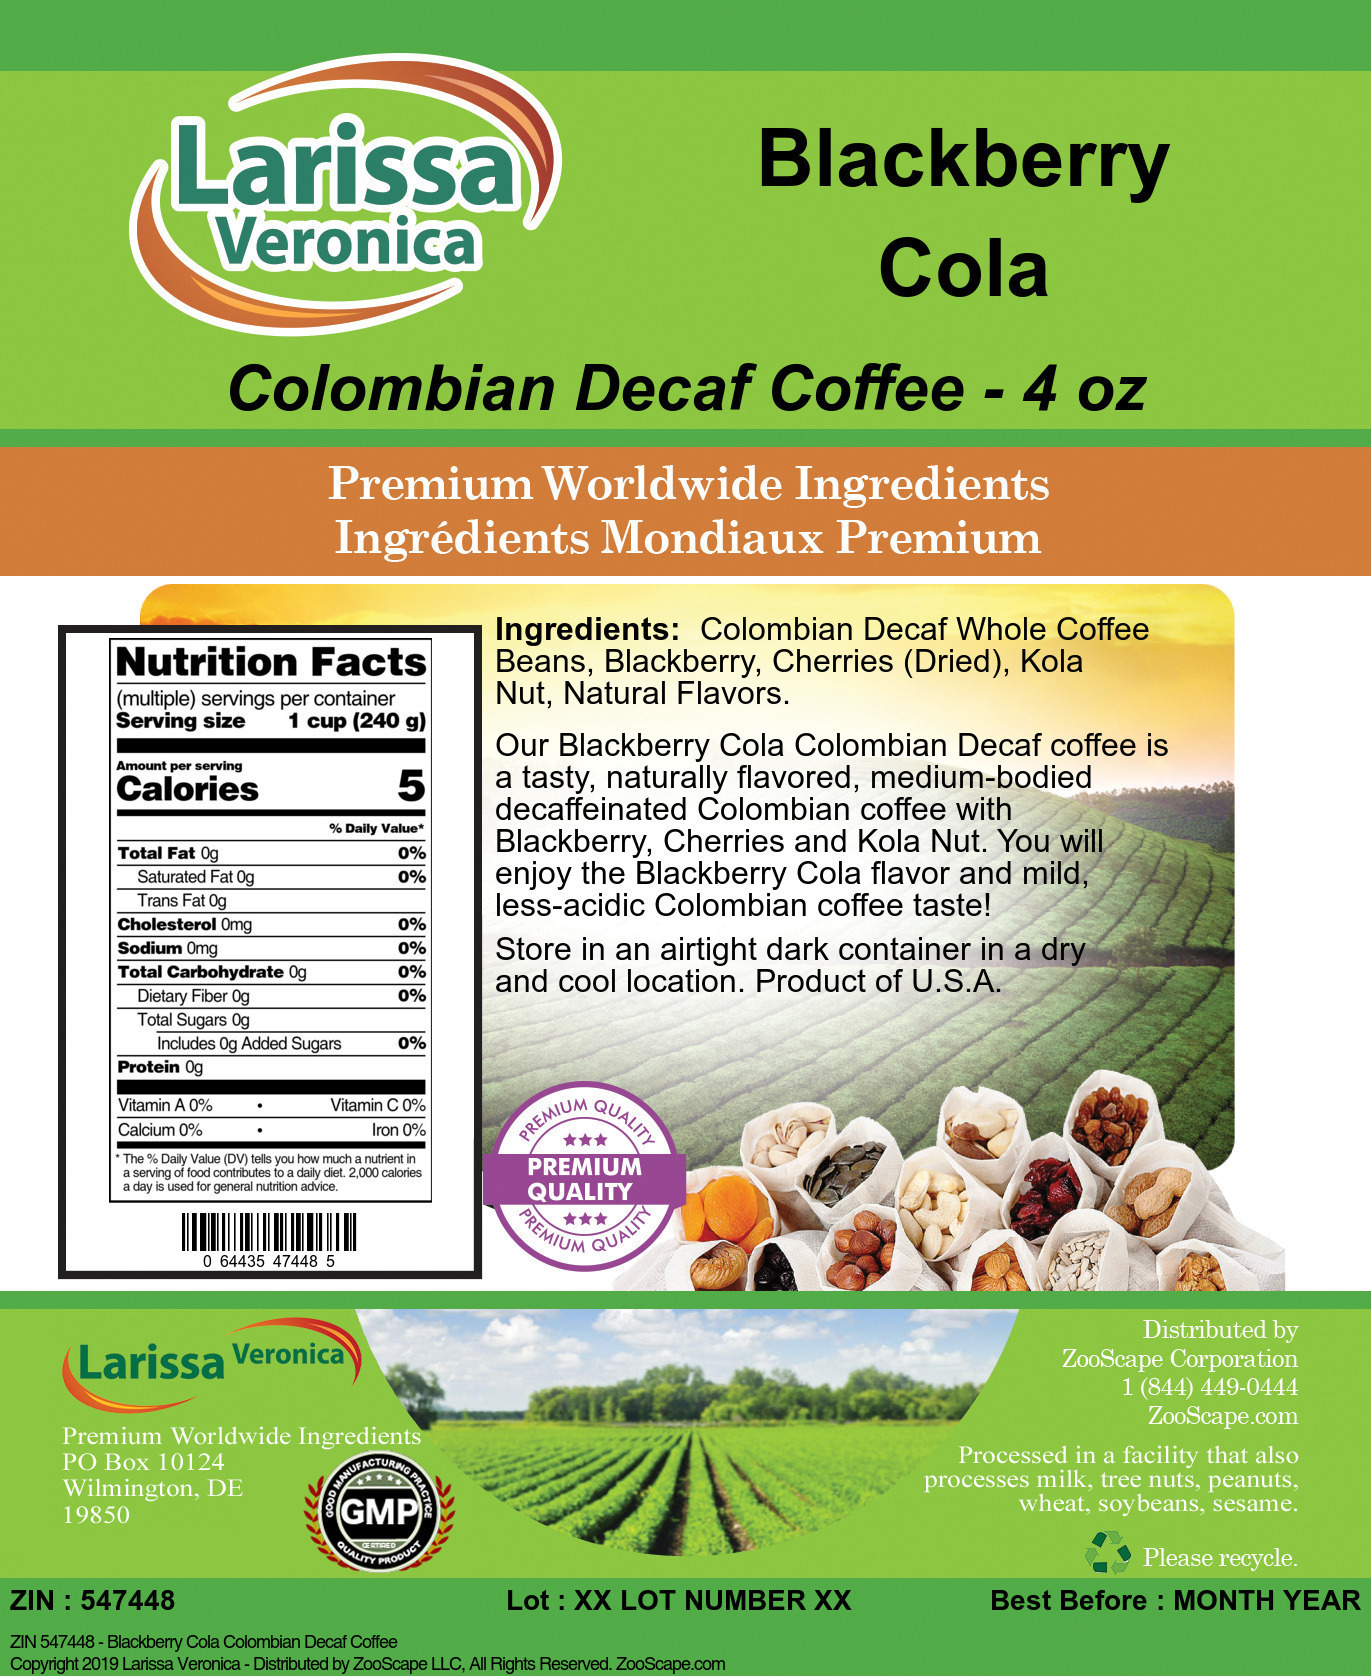 Blackberry Cola Colombian Decaf Coffee - Label